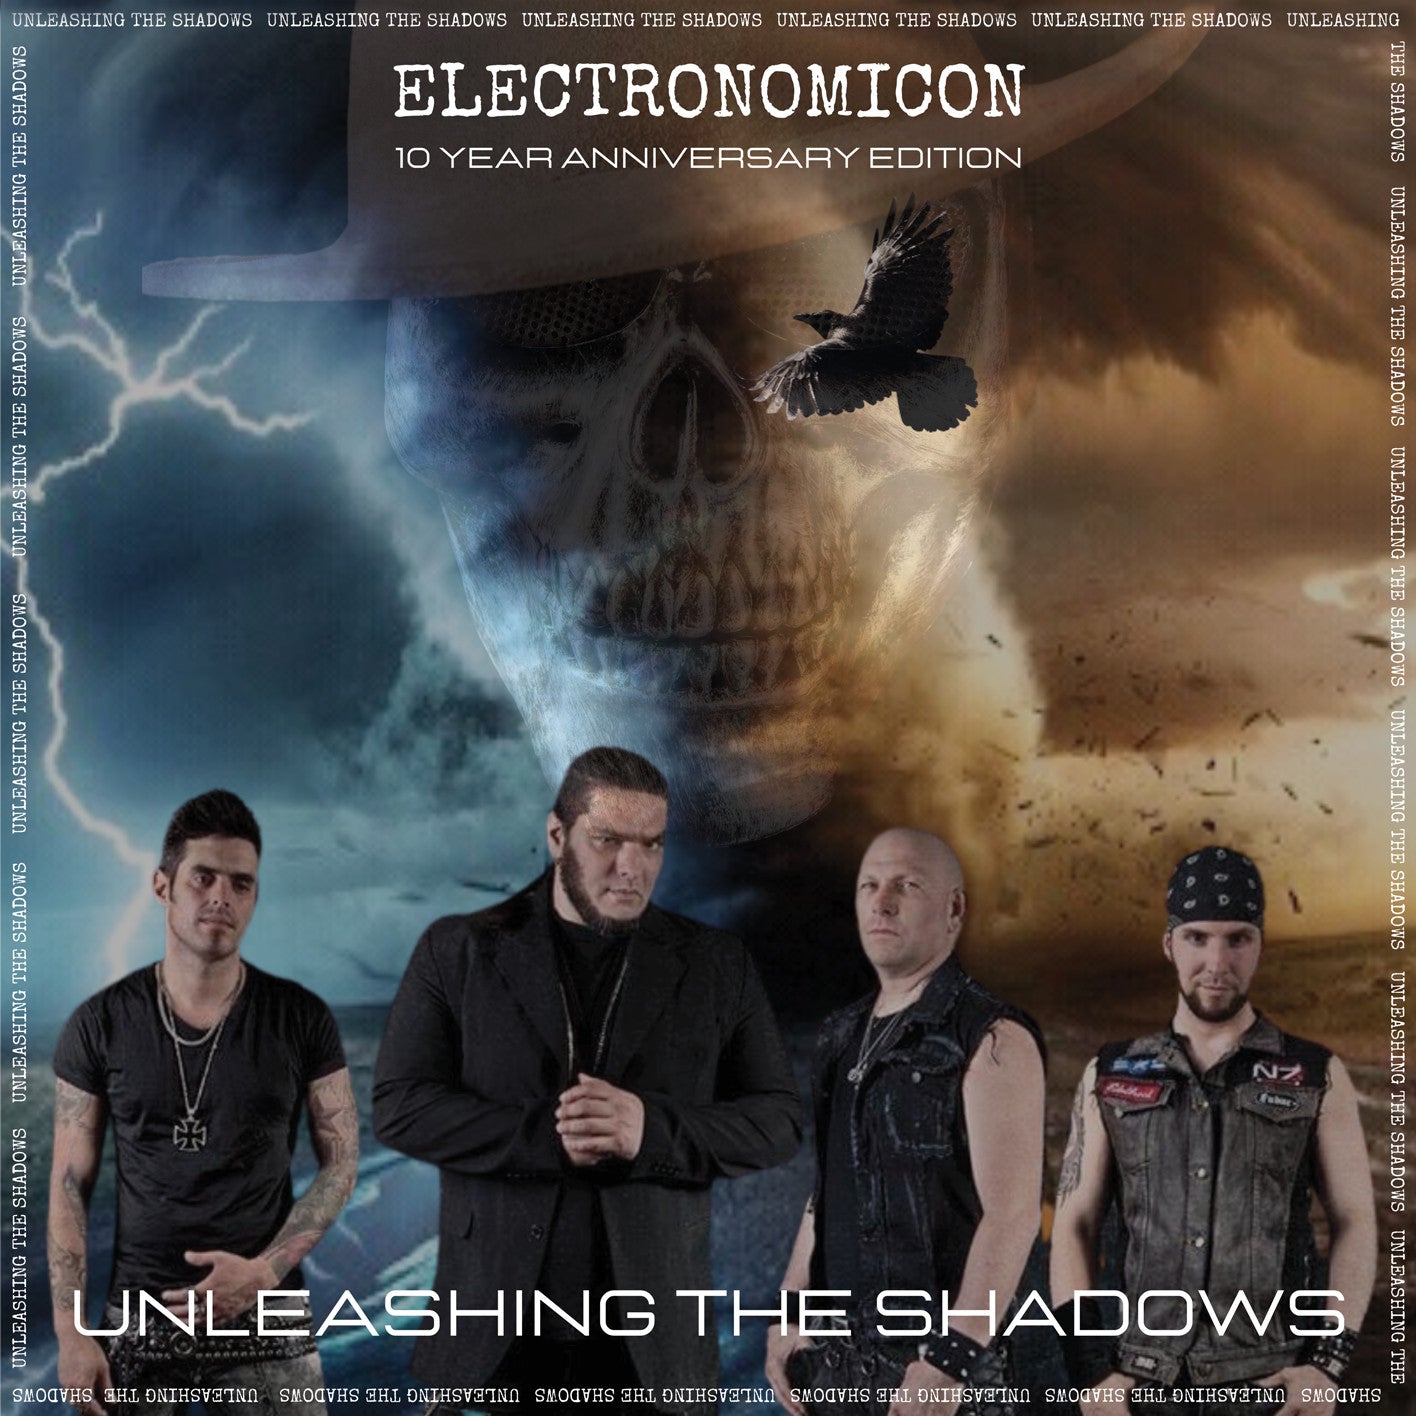 ElectroNomicon - Unleashing The Shadows - 10 Year Anniversary Edition